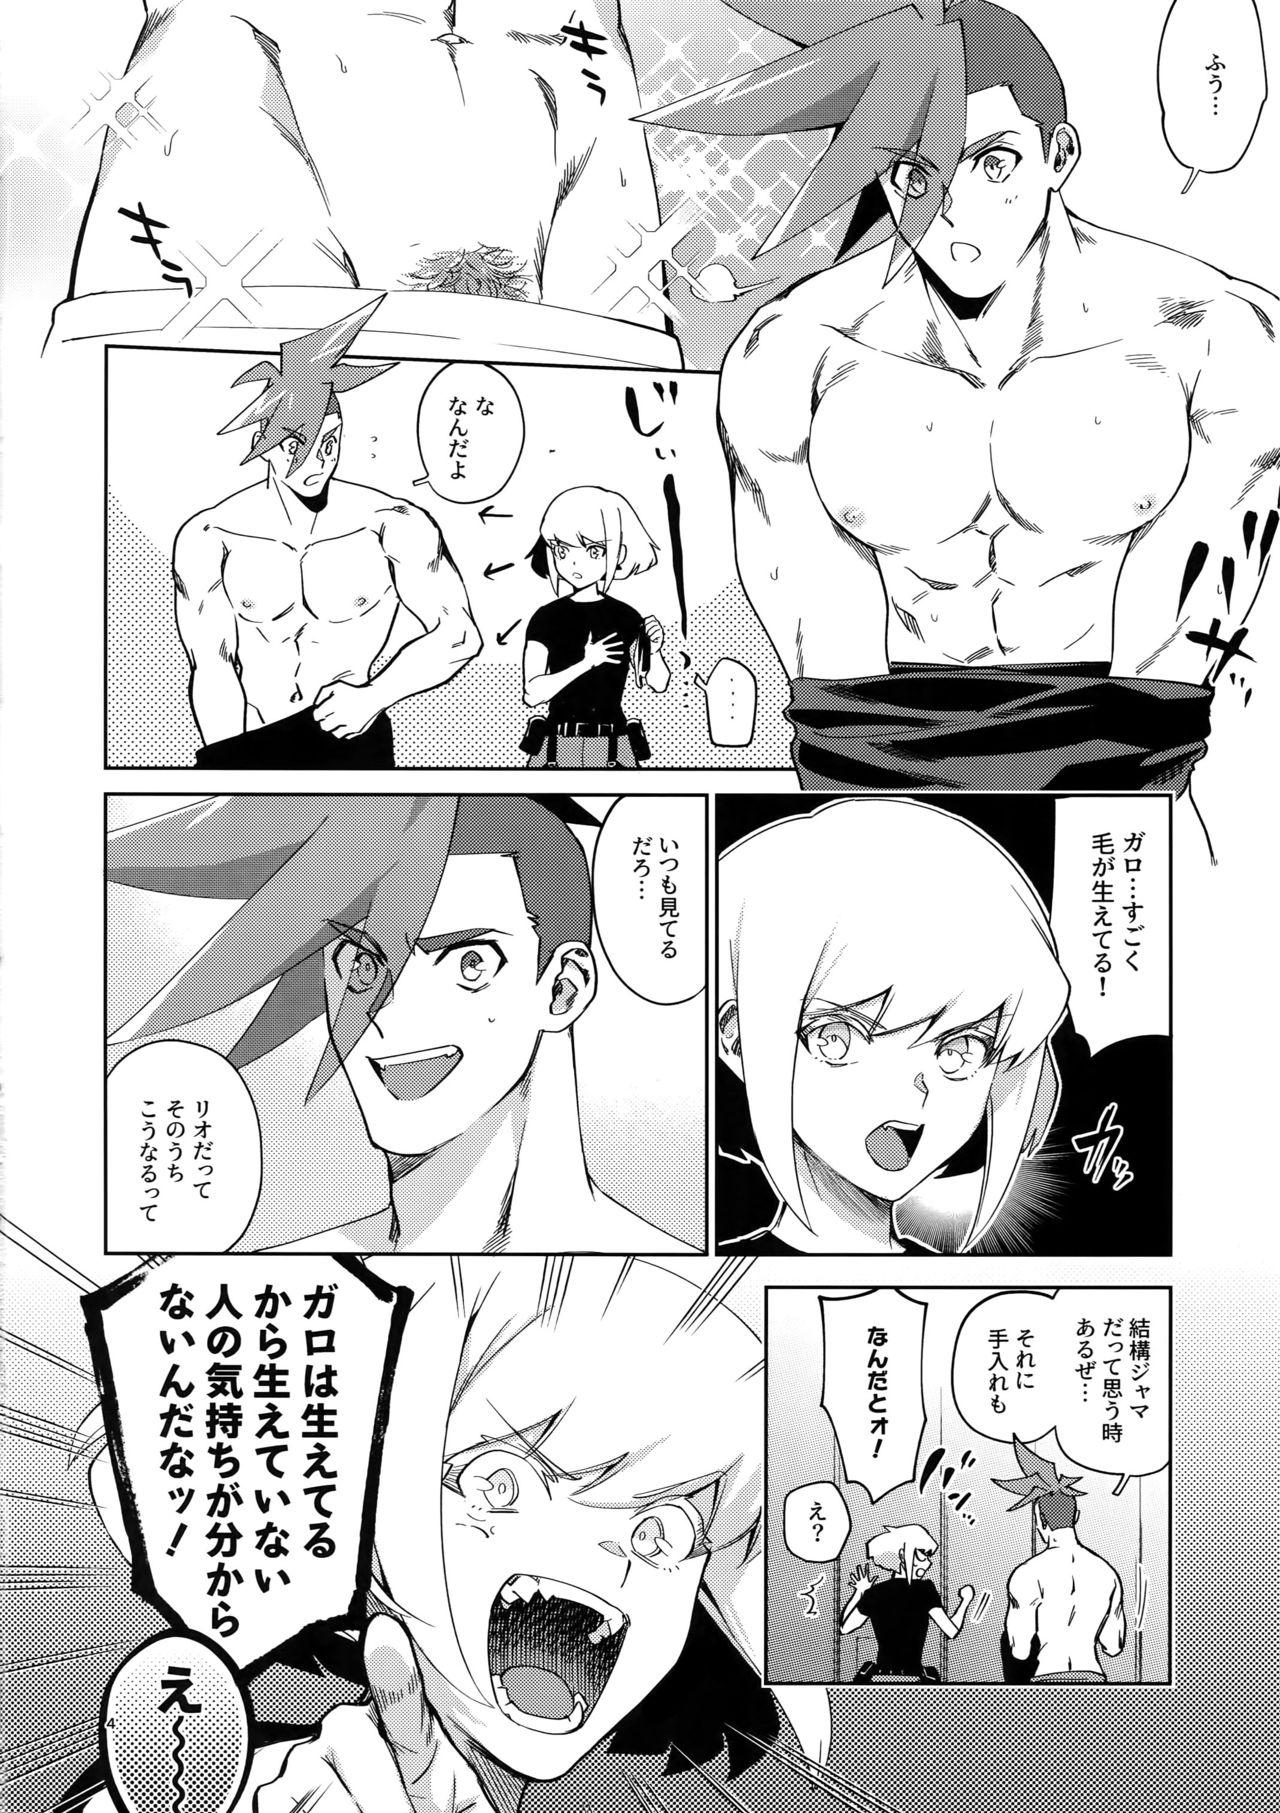 Cumload One and Only - Promare Namorada - Page 3